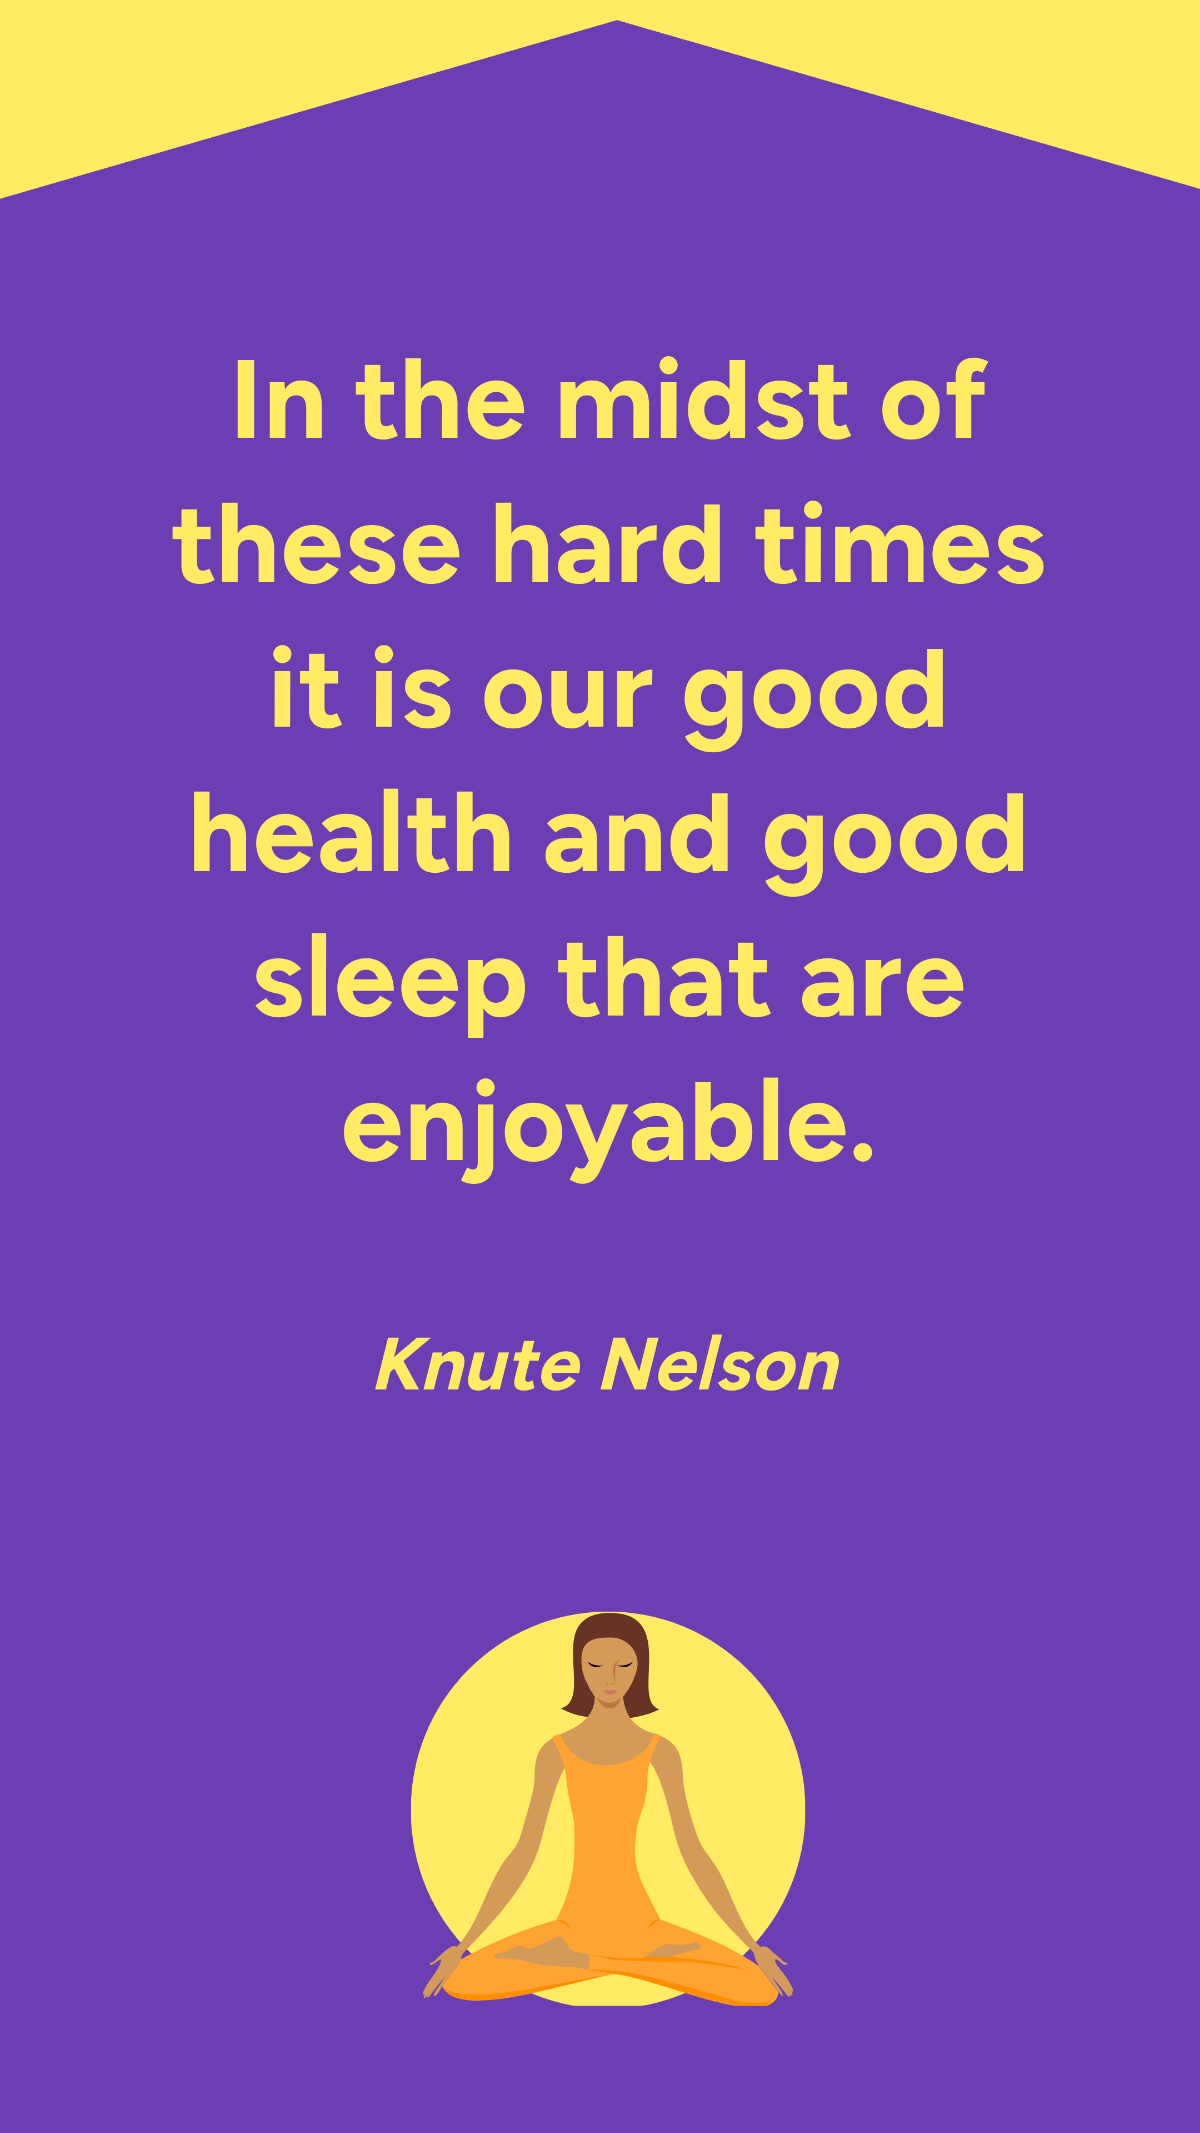 Knute Nelson - In the midst of these hard times it is our good health and good sleep that are enjoyable. Template